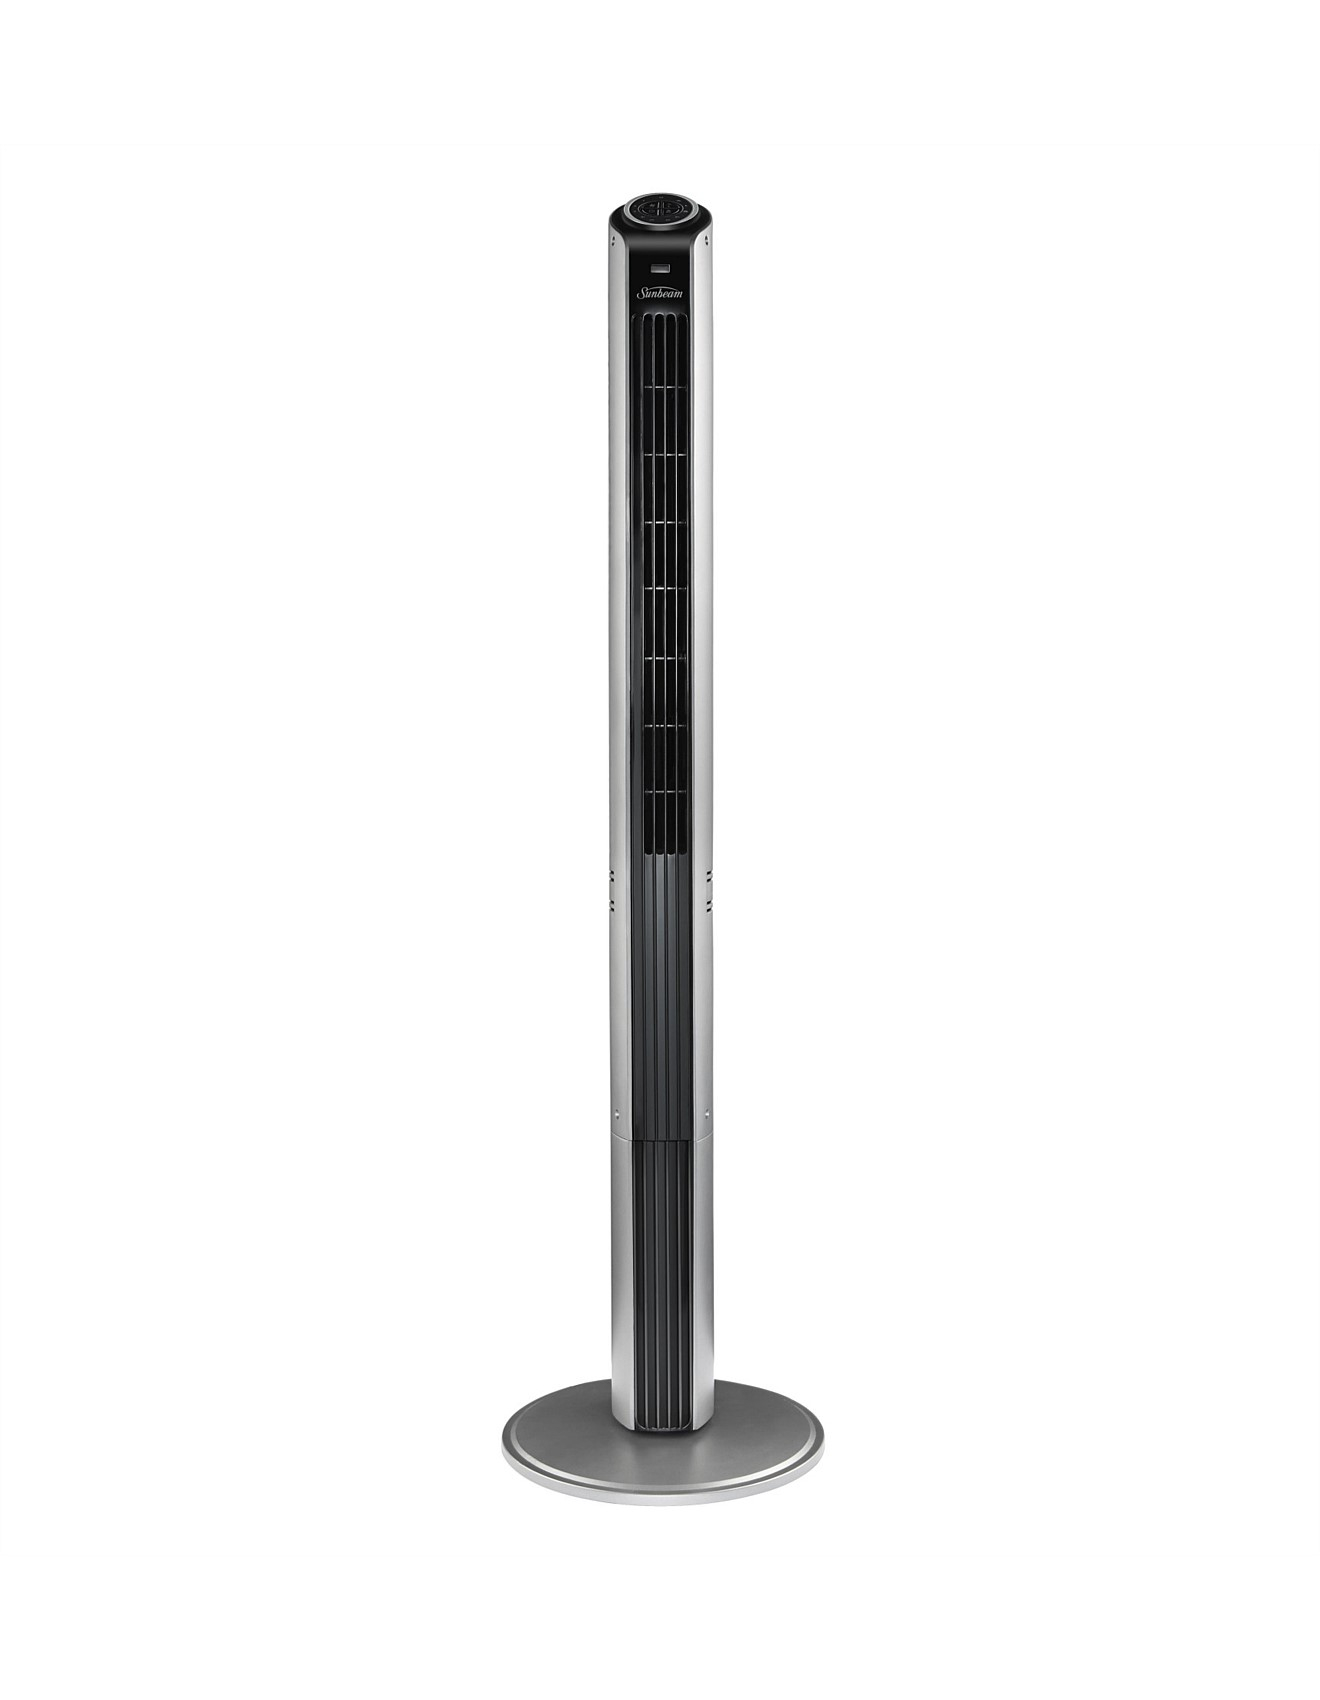 Super Slim Tower Fan With Night Mode intended for proportions 1320 X 1700